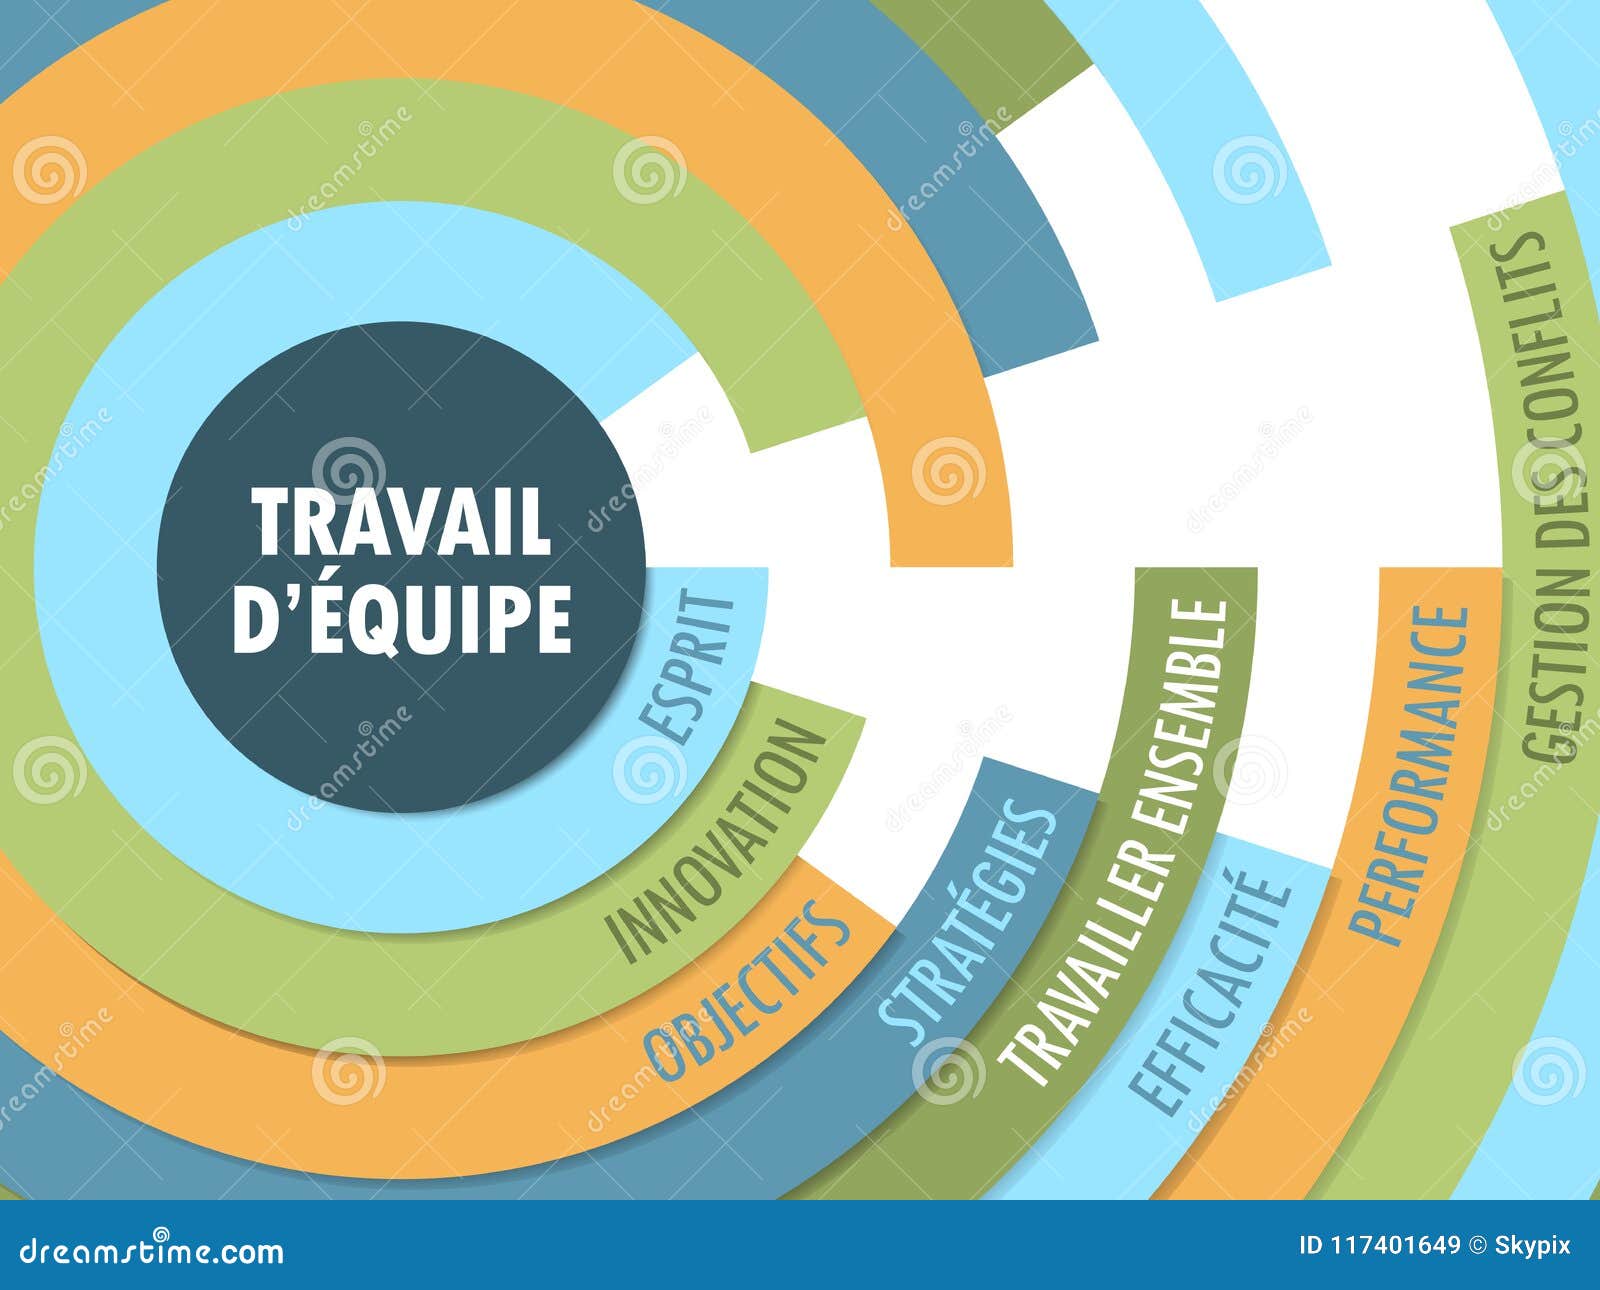 travail d`equipe radial format concept tag cloud